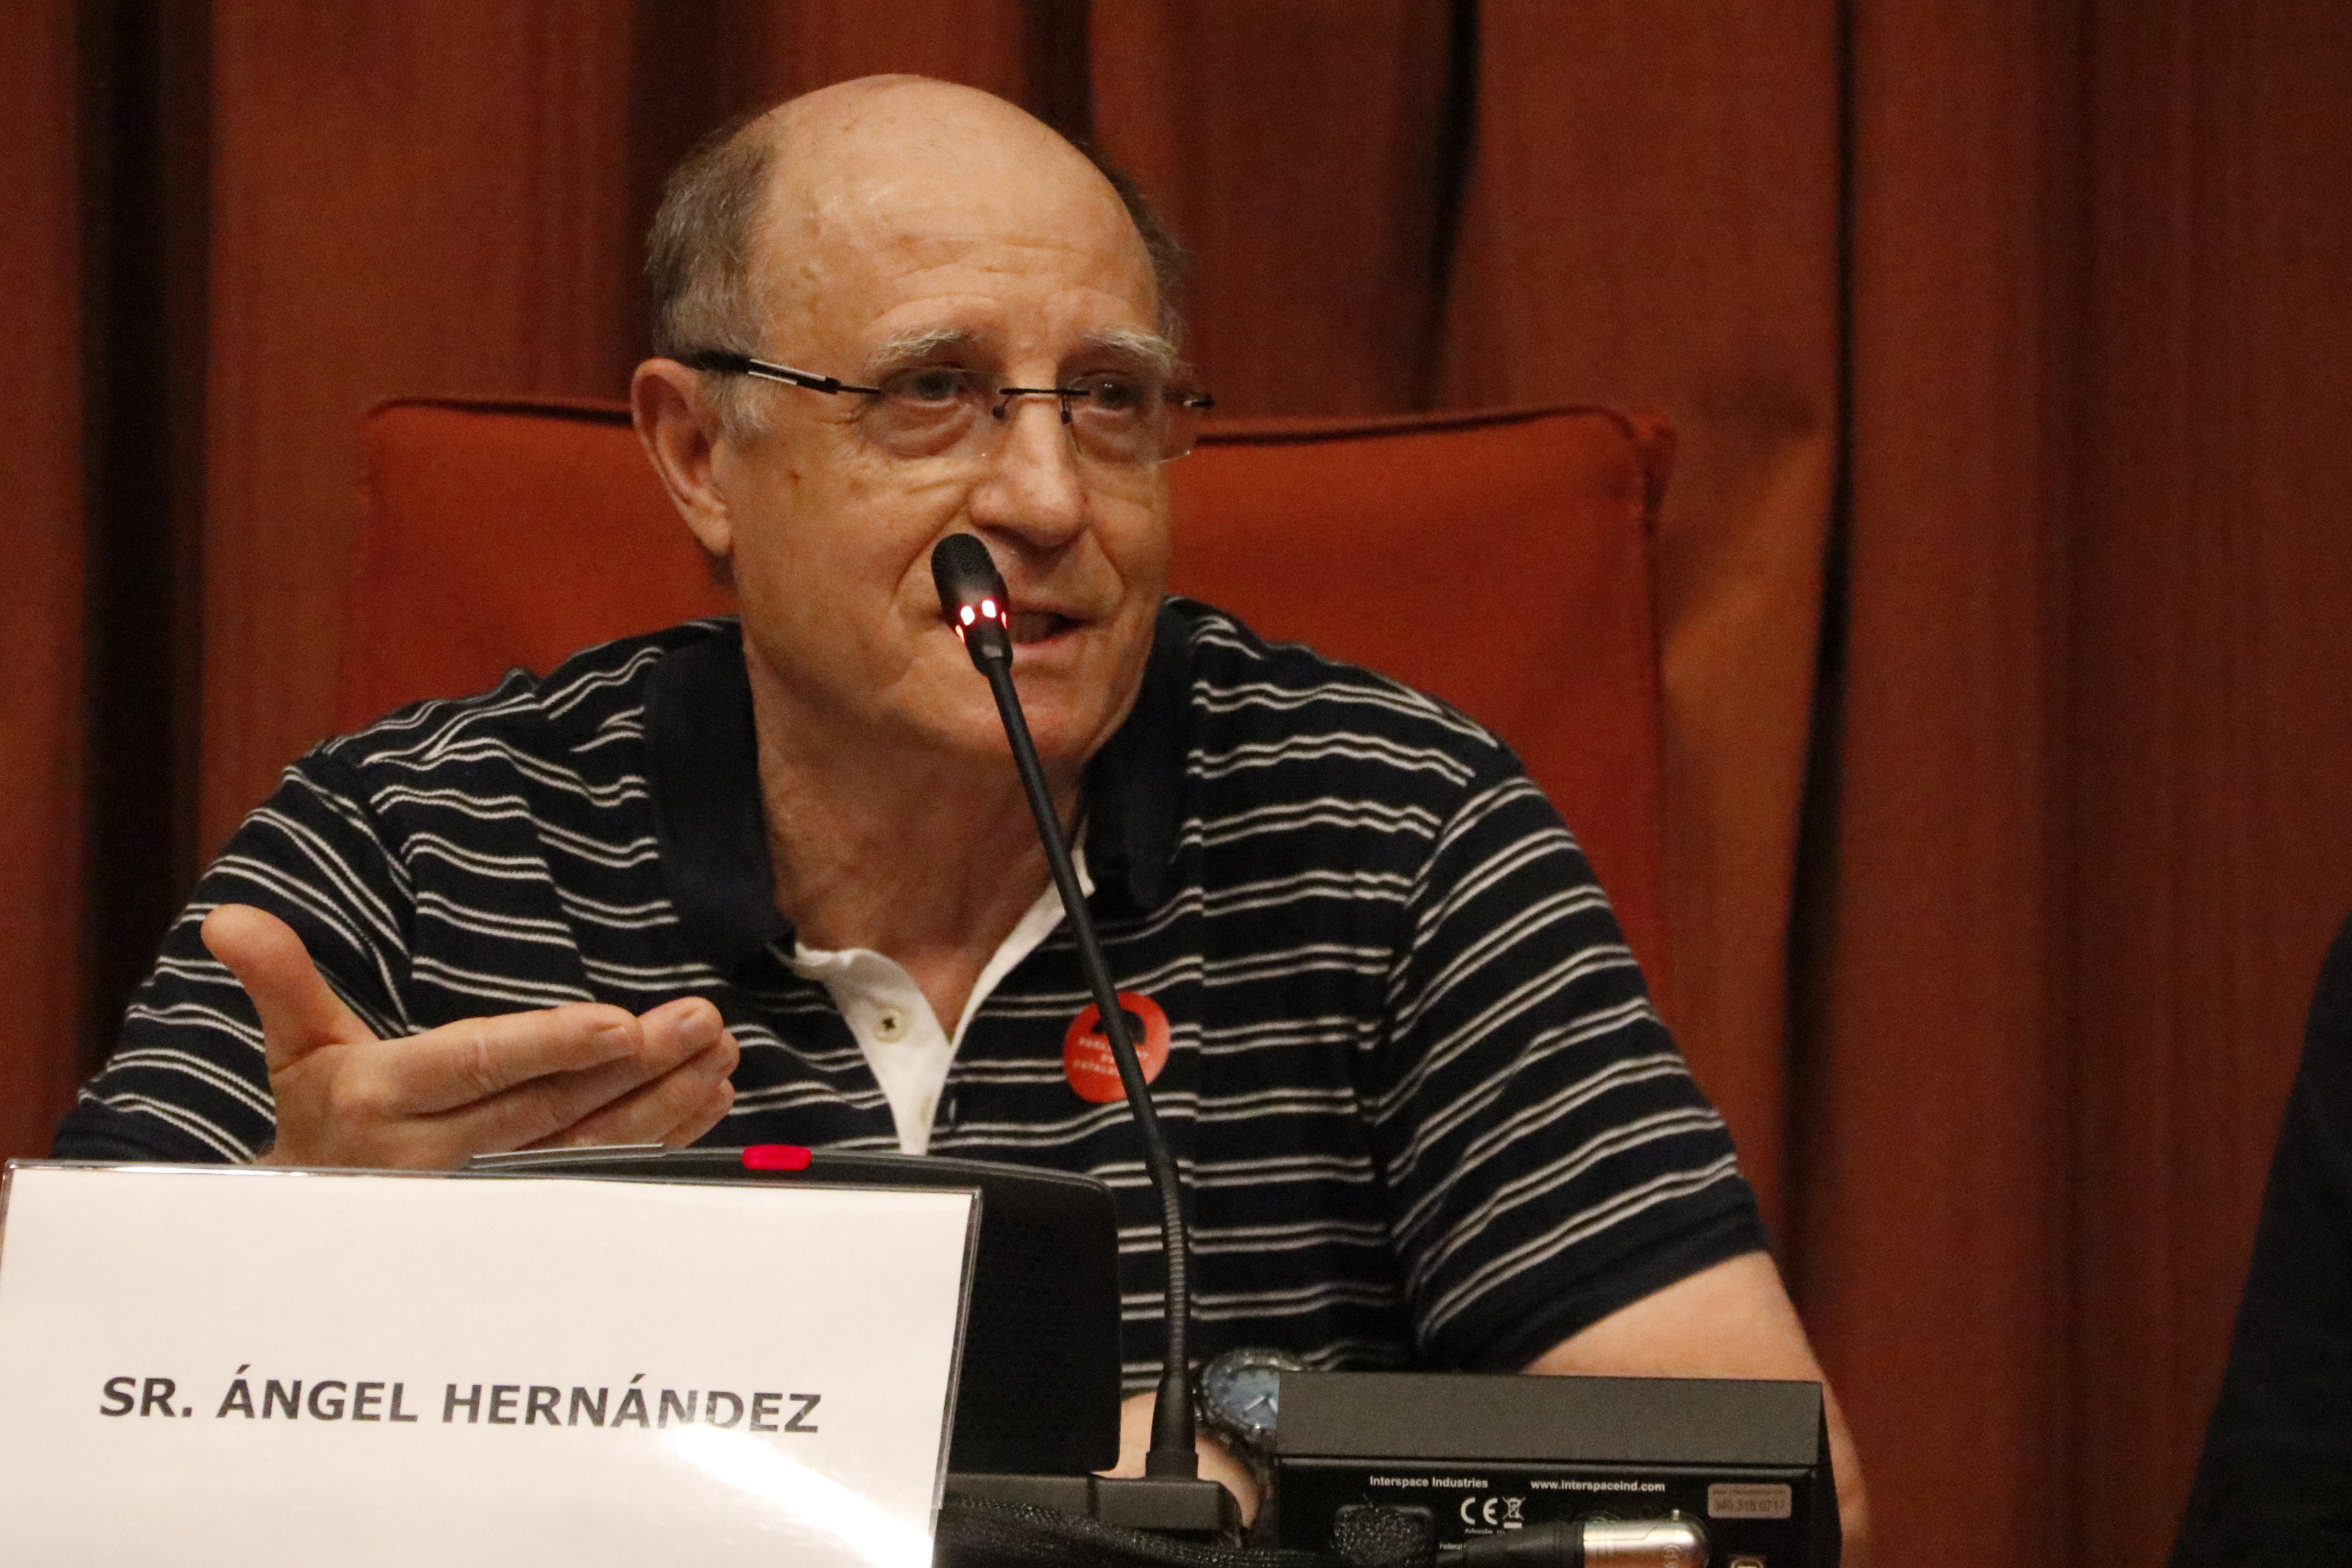 Ángel Hernández, who helped his wife die in April 2019, went to the Catalan Parliament on June 19, 2019 to defend the decriminalization of euthanasia and assisted death (Marta Sierra/ACN)